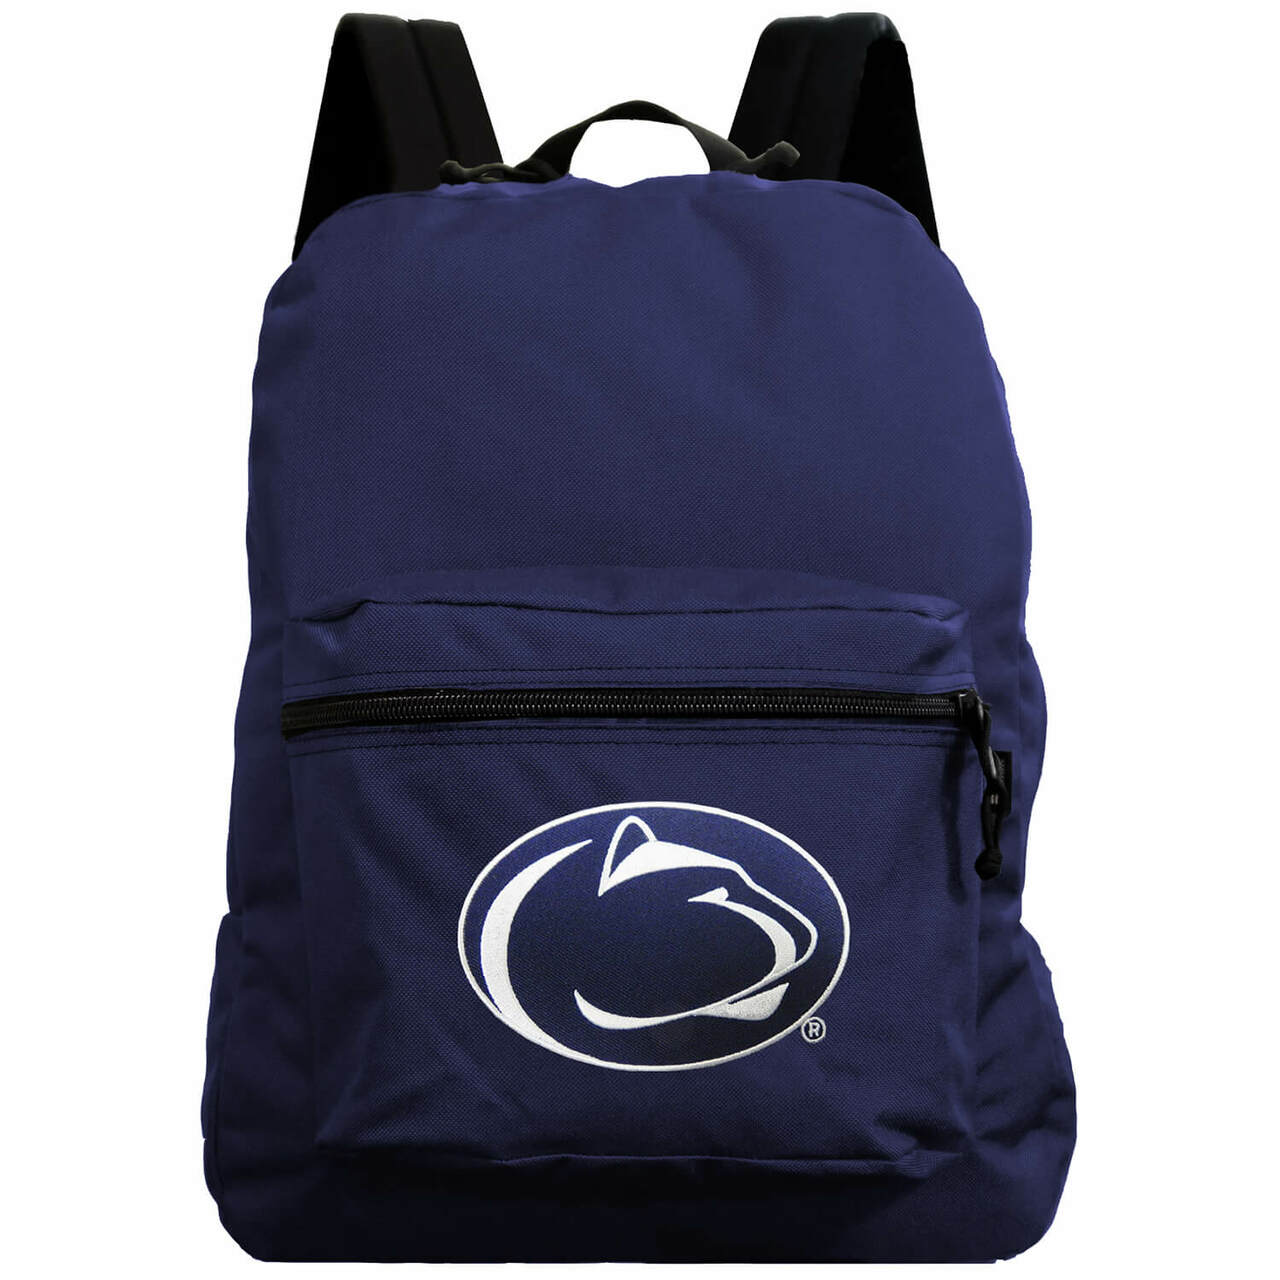 Penn State Nittany Lions Made in the USA premium Backpack